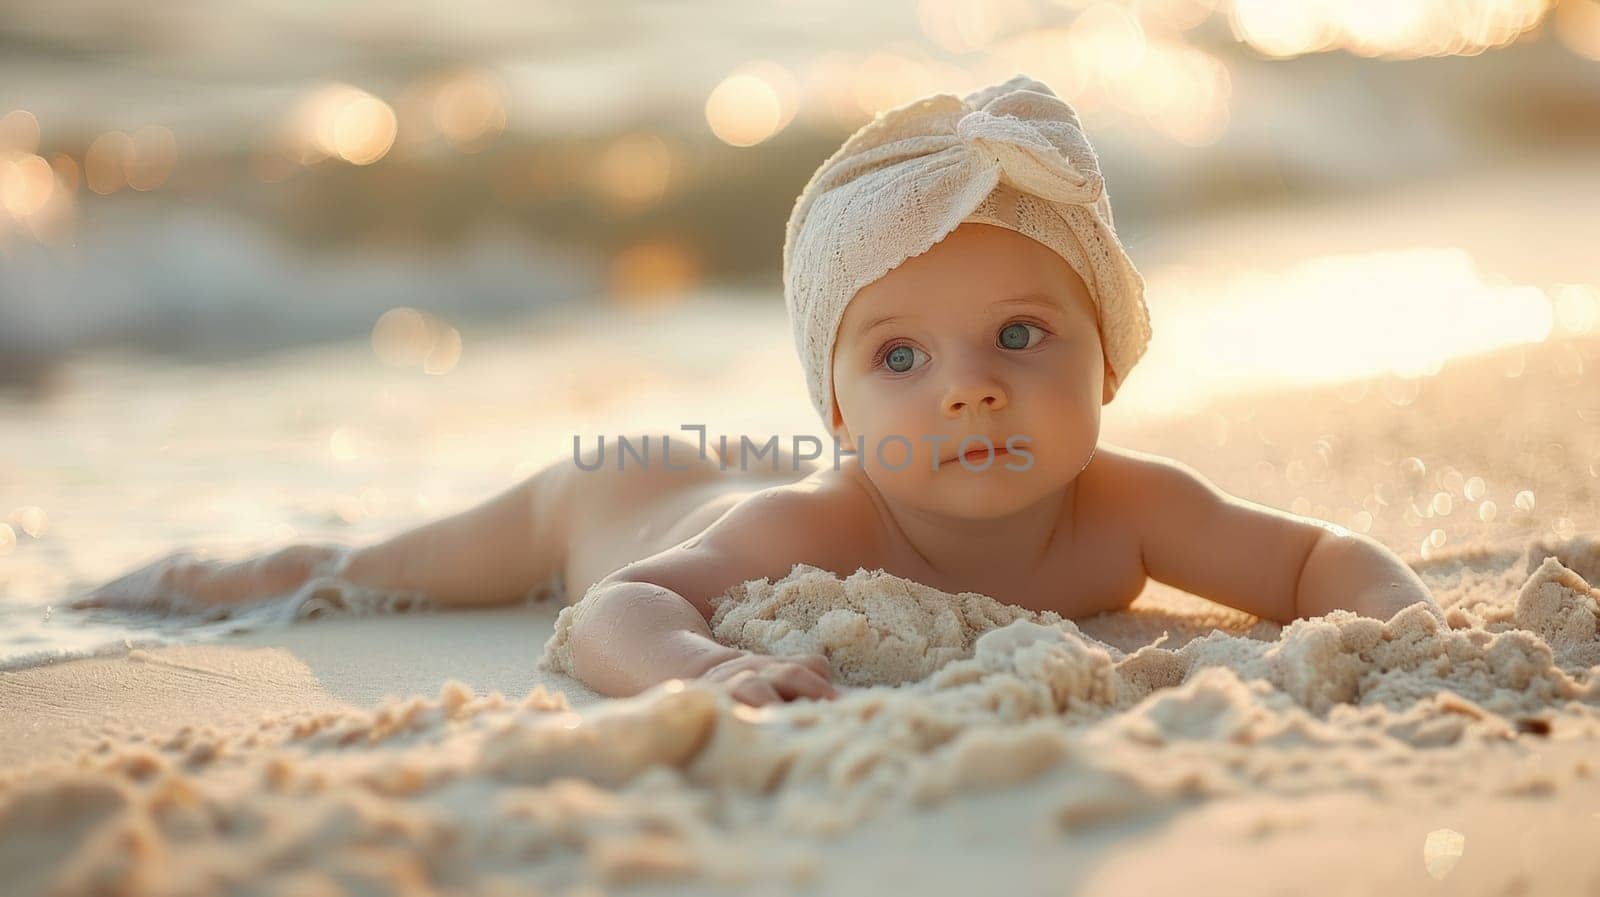 A baby laying on the beach with a towel wrapped around its head, AI by starush